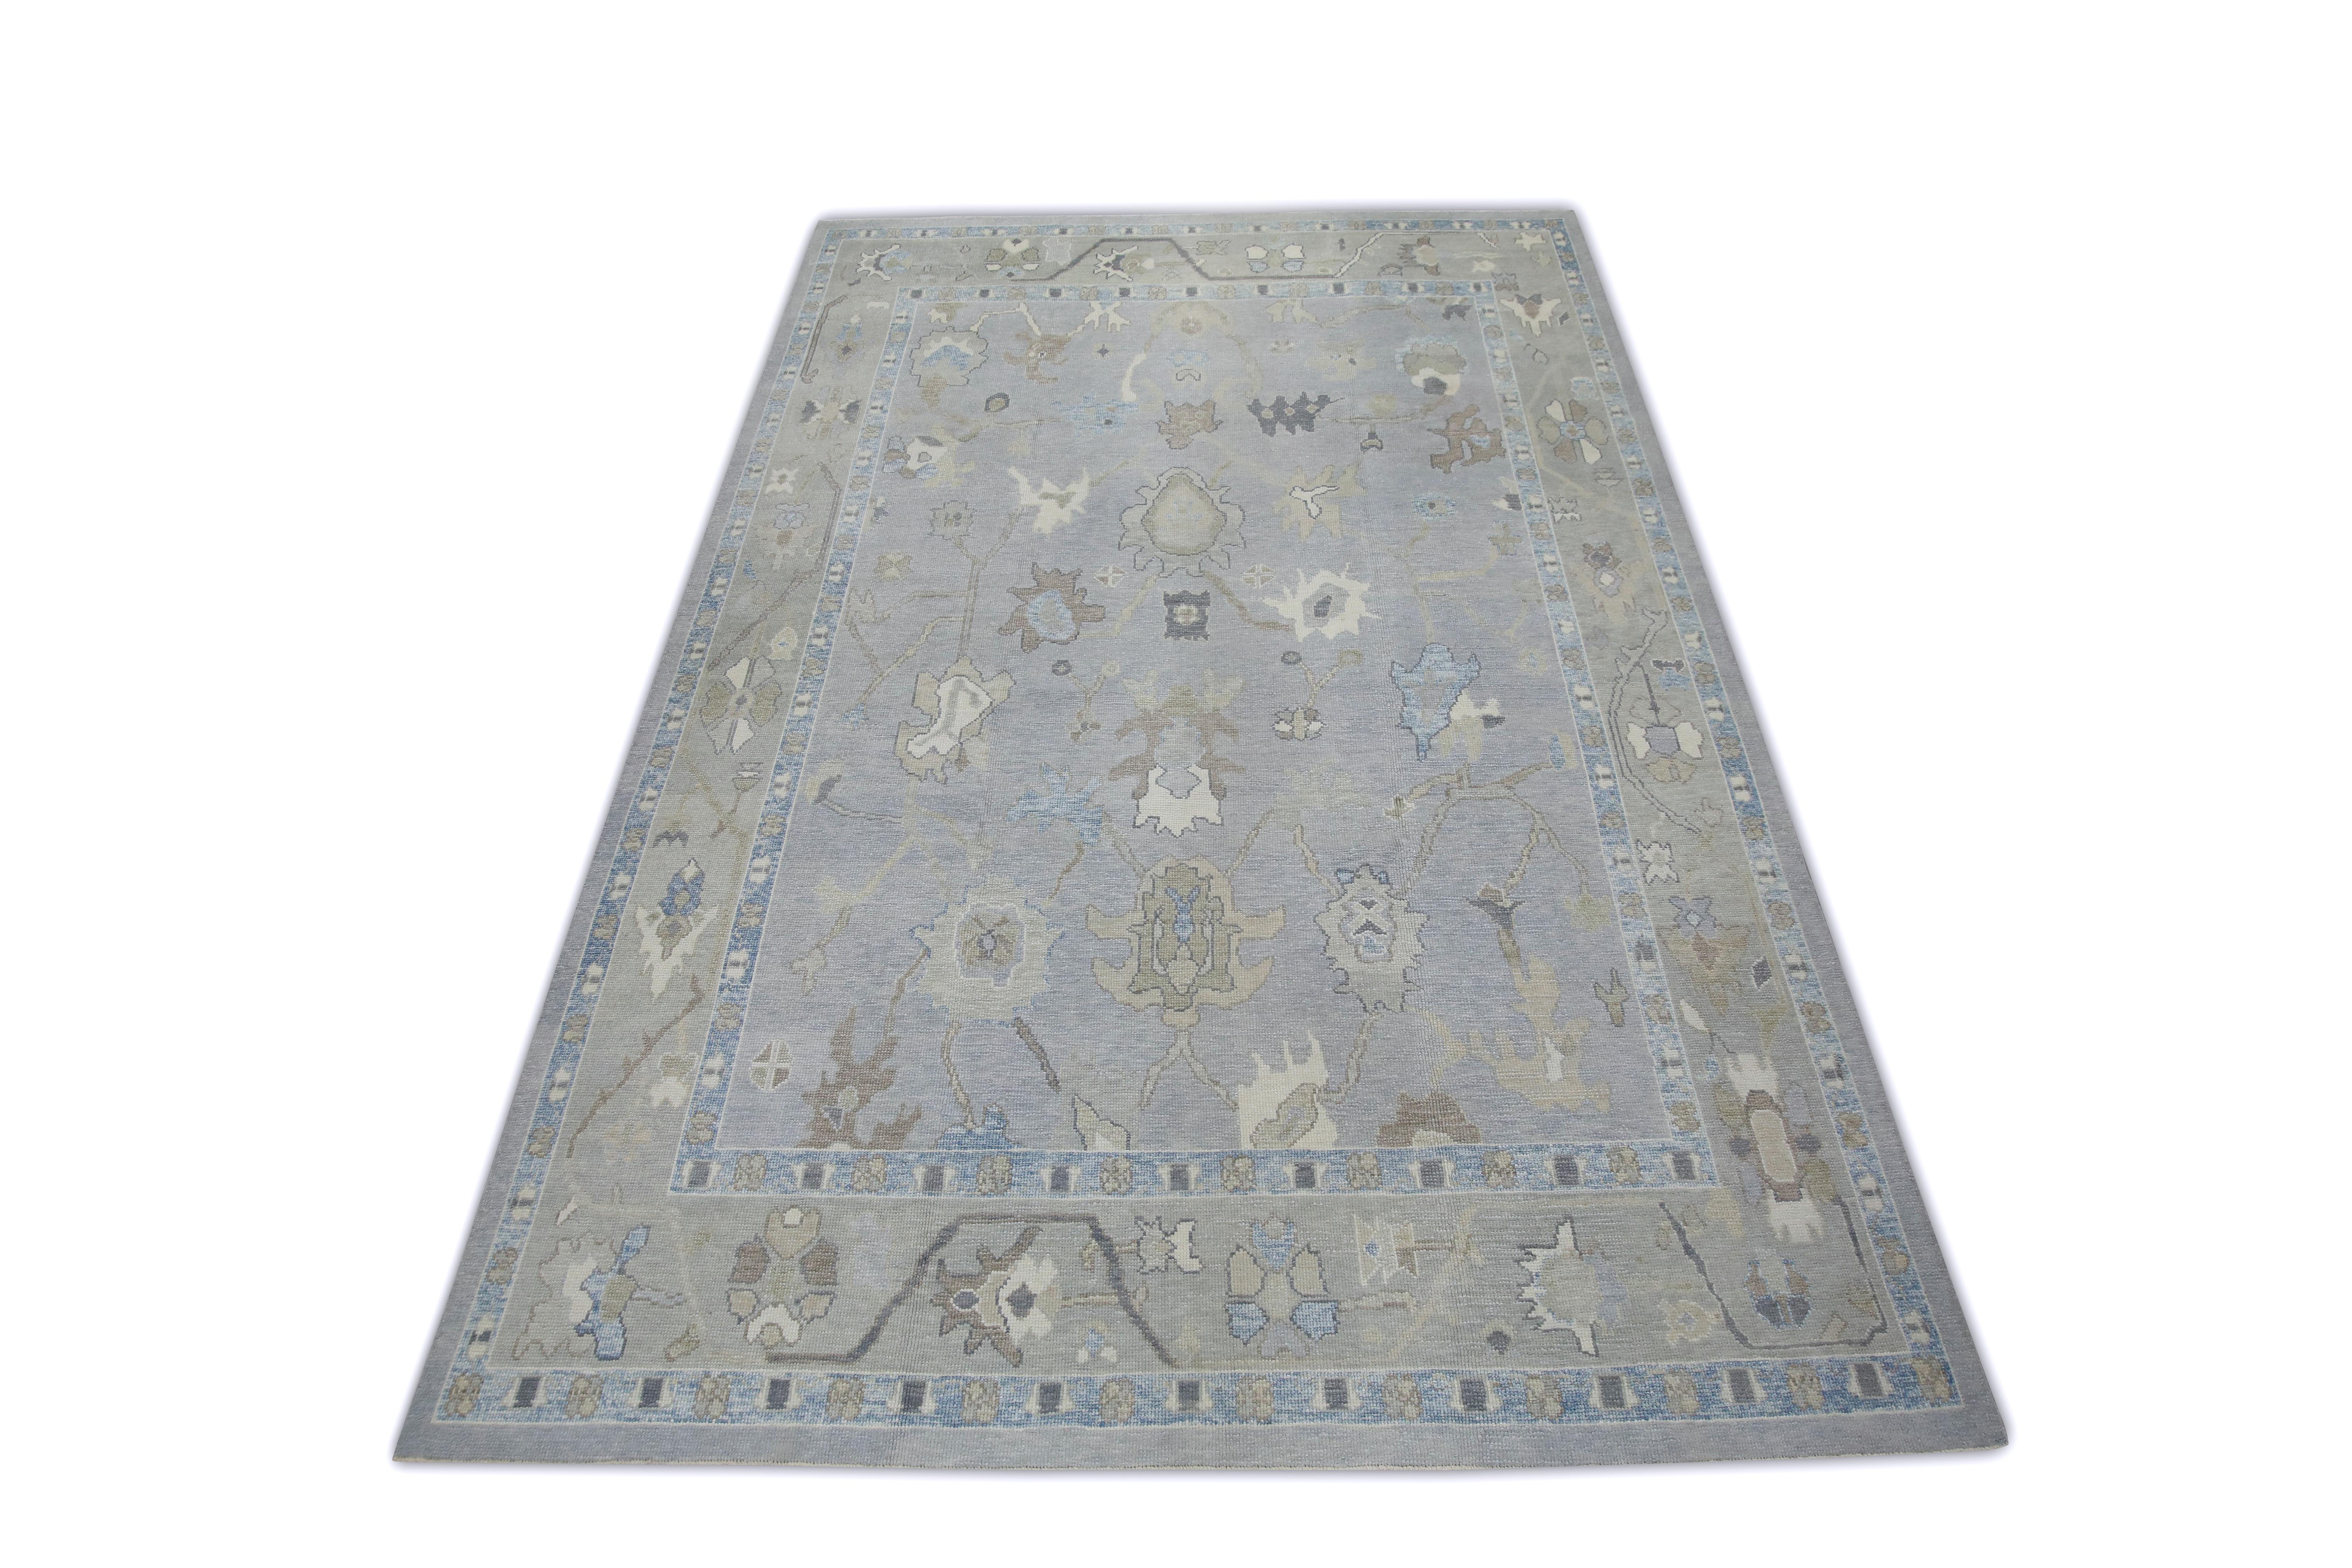 This Turkish oushak rug is a stunning piece of art that has been handwoven using traditional techniques by skilled artisans. The rug features intricate patterns and a soft color palette that is achieved through the use of natural vegetable